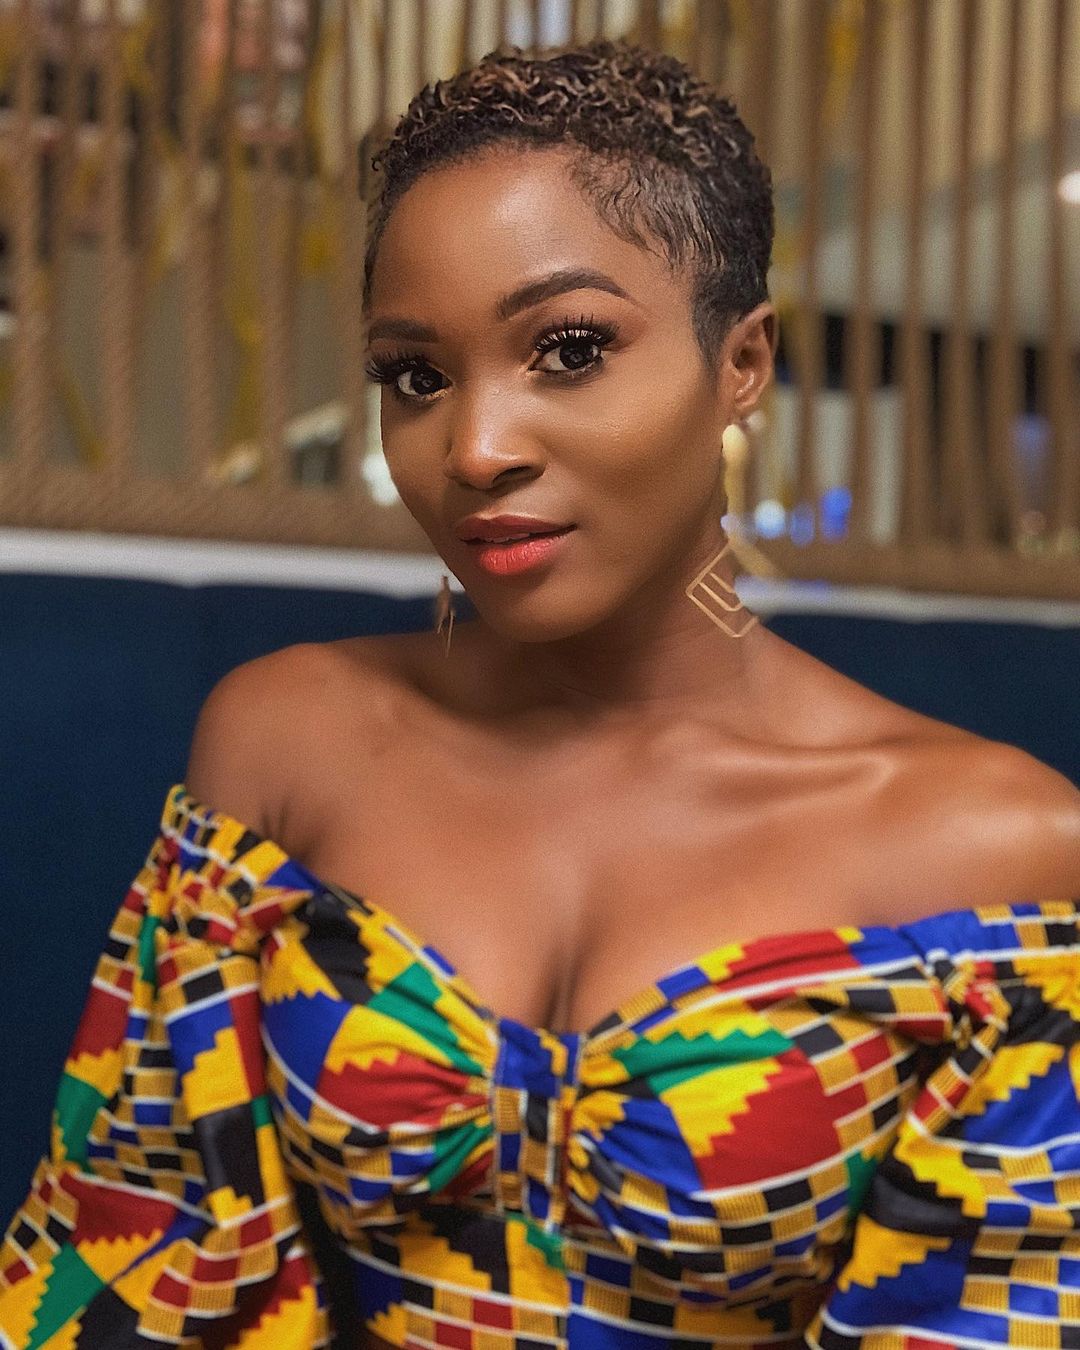 If you're cuffed, be cuffed - Ex-rapper, Eva Alordiah calls out married men who don’t wear their wedding bands